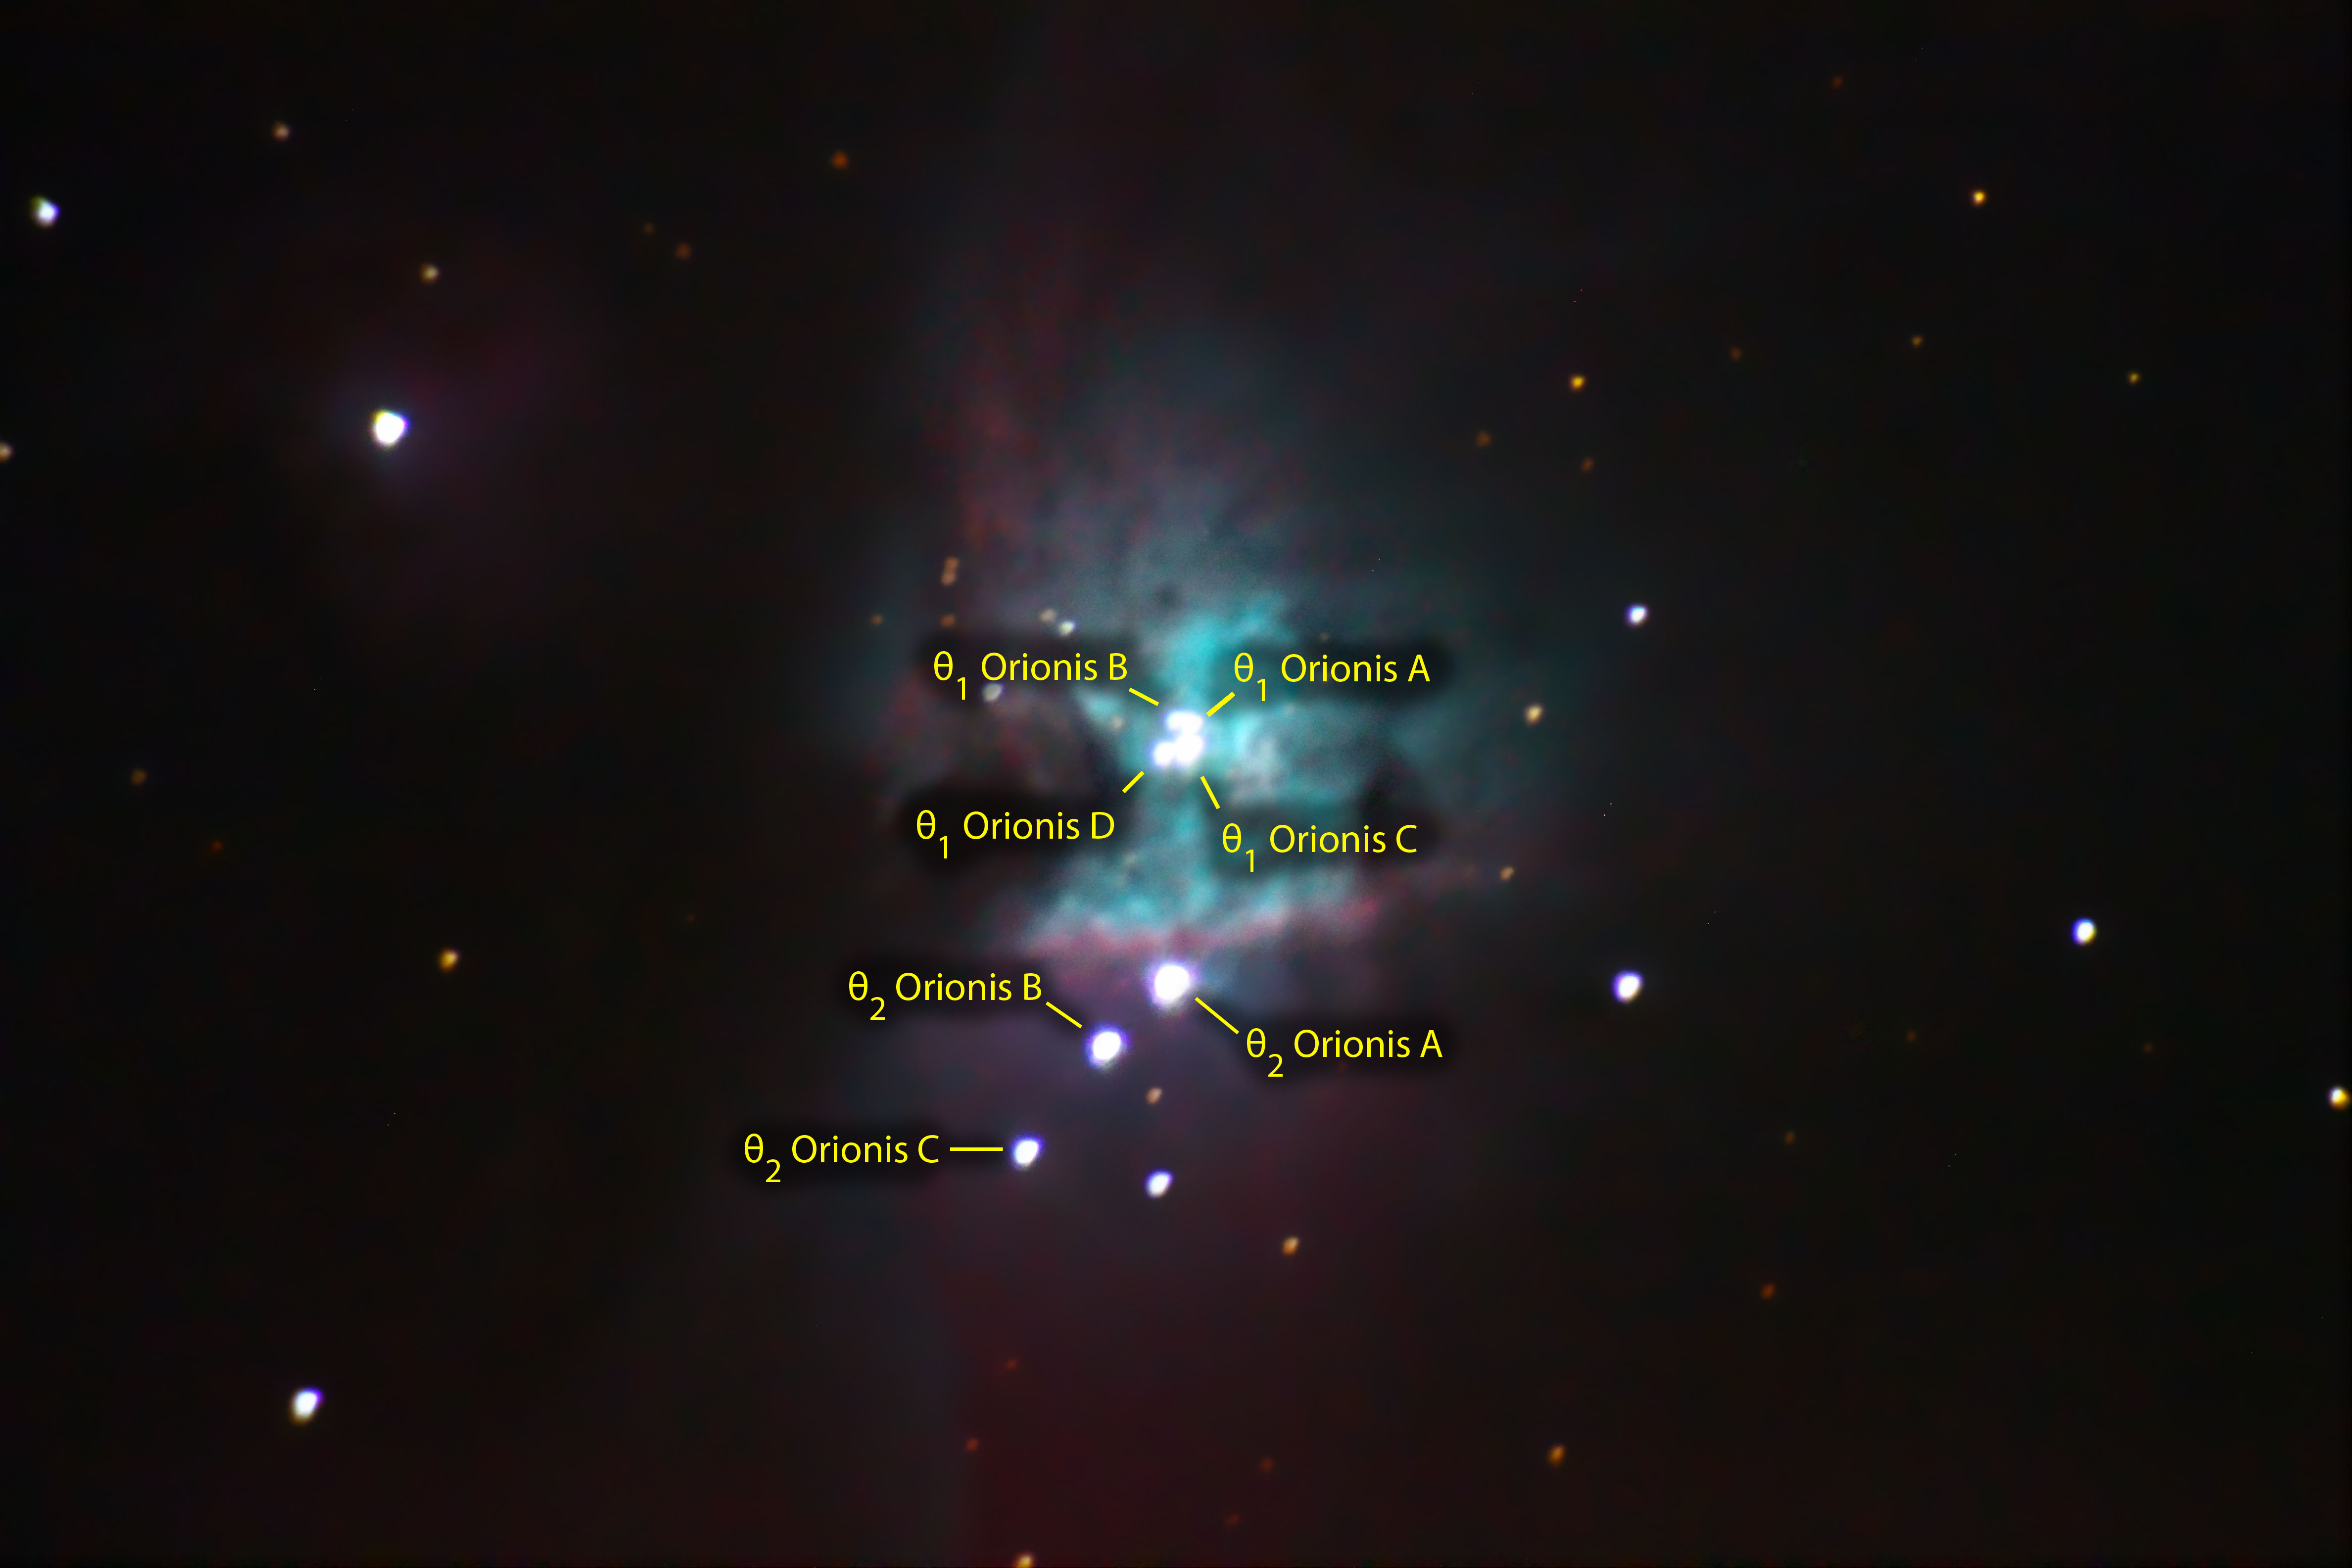 Simple annotated image of The Great Nebula in Orion